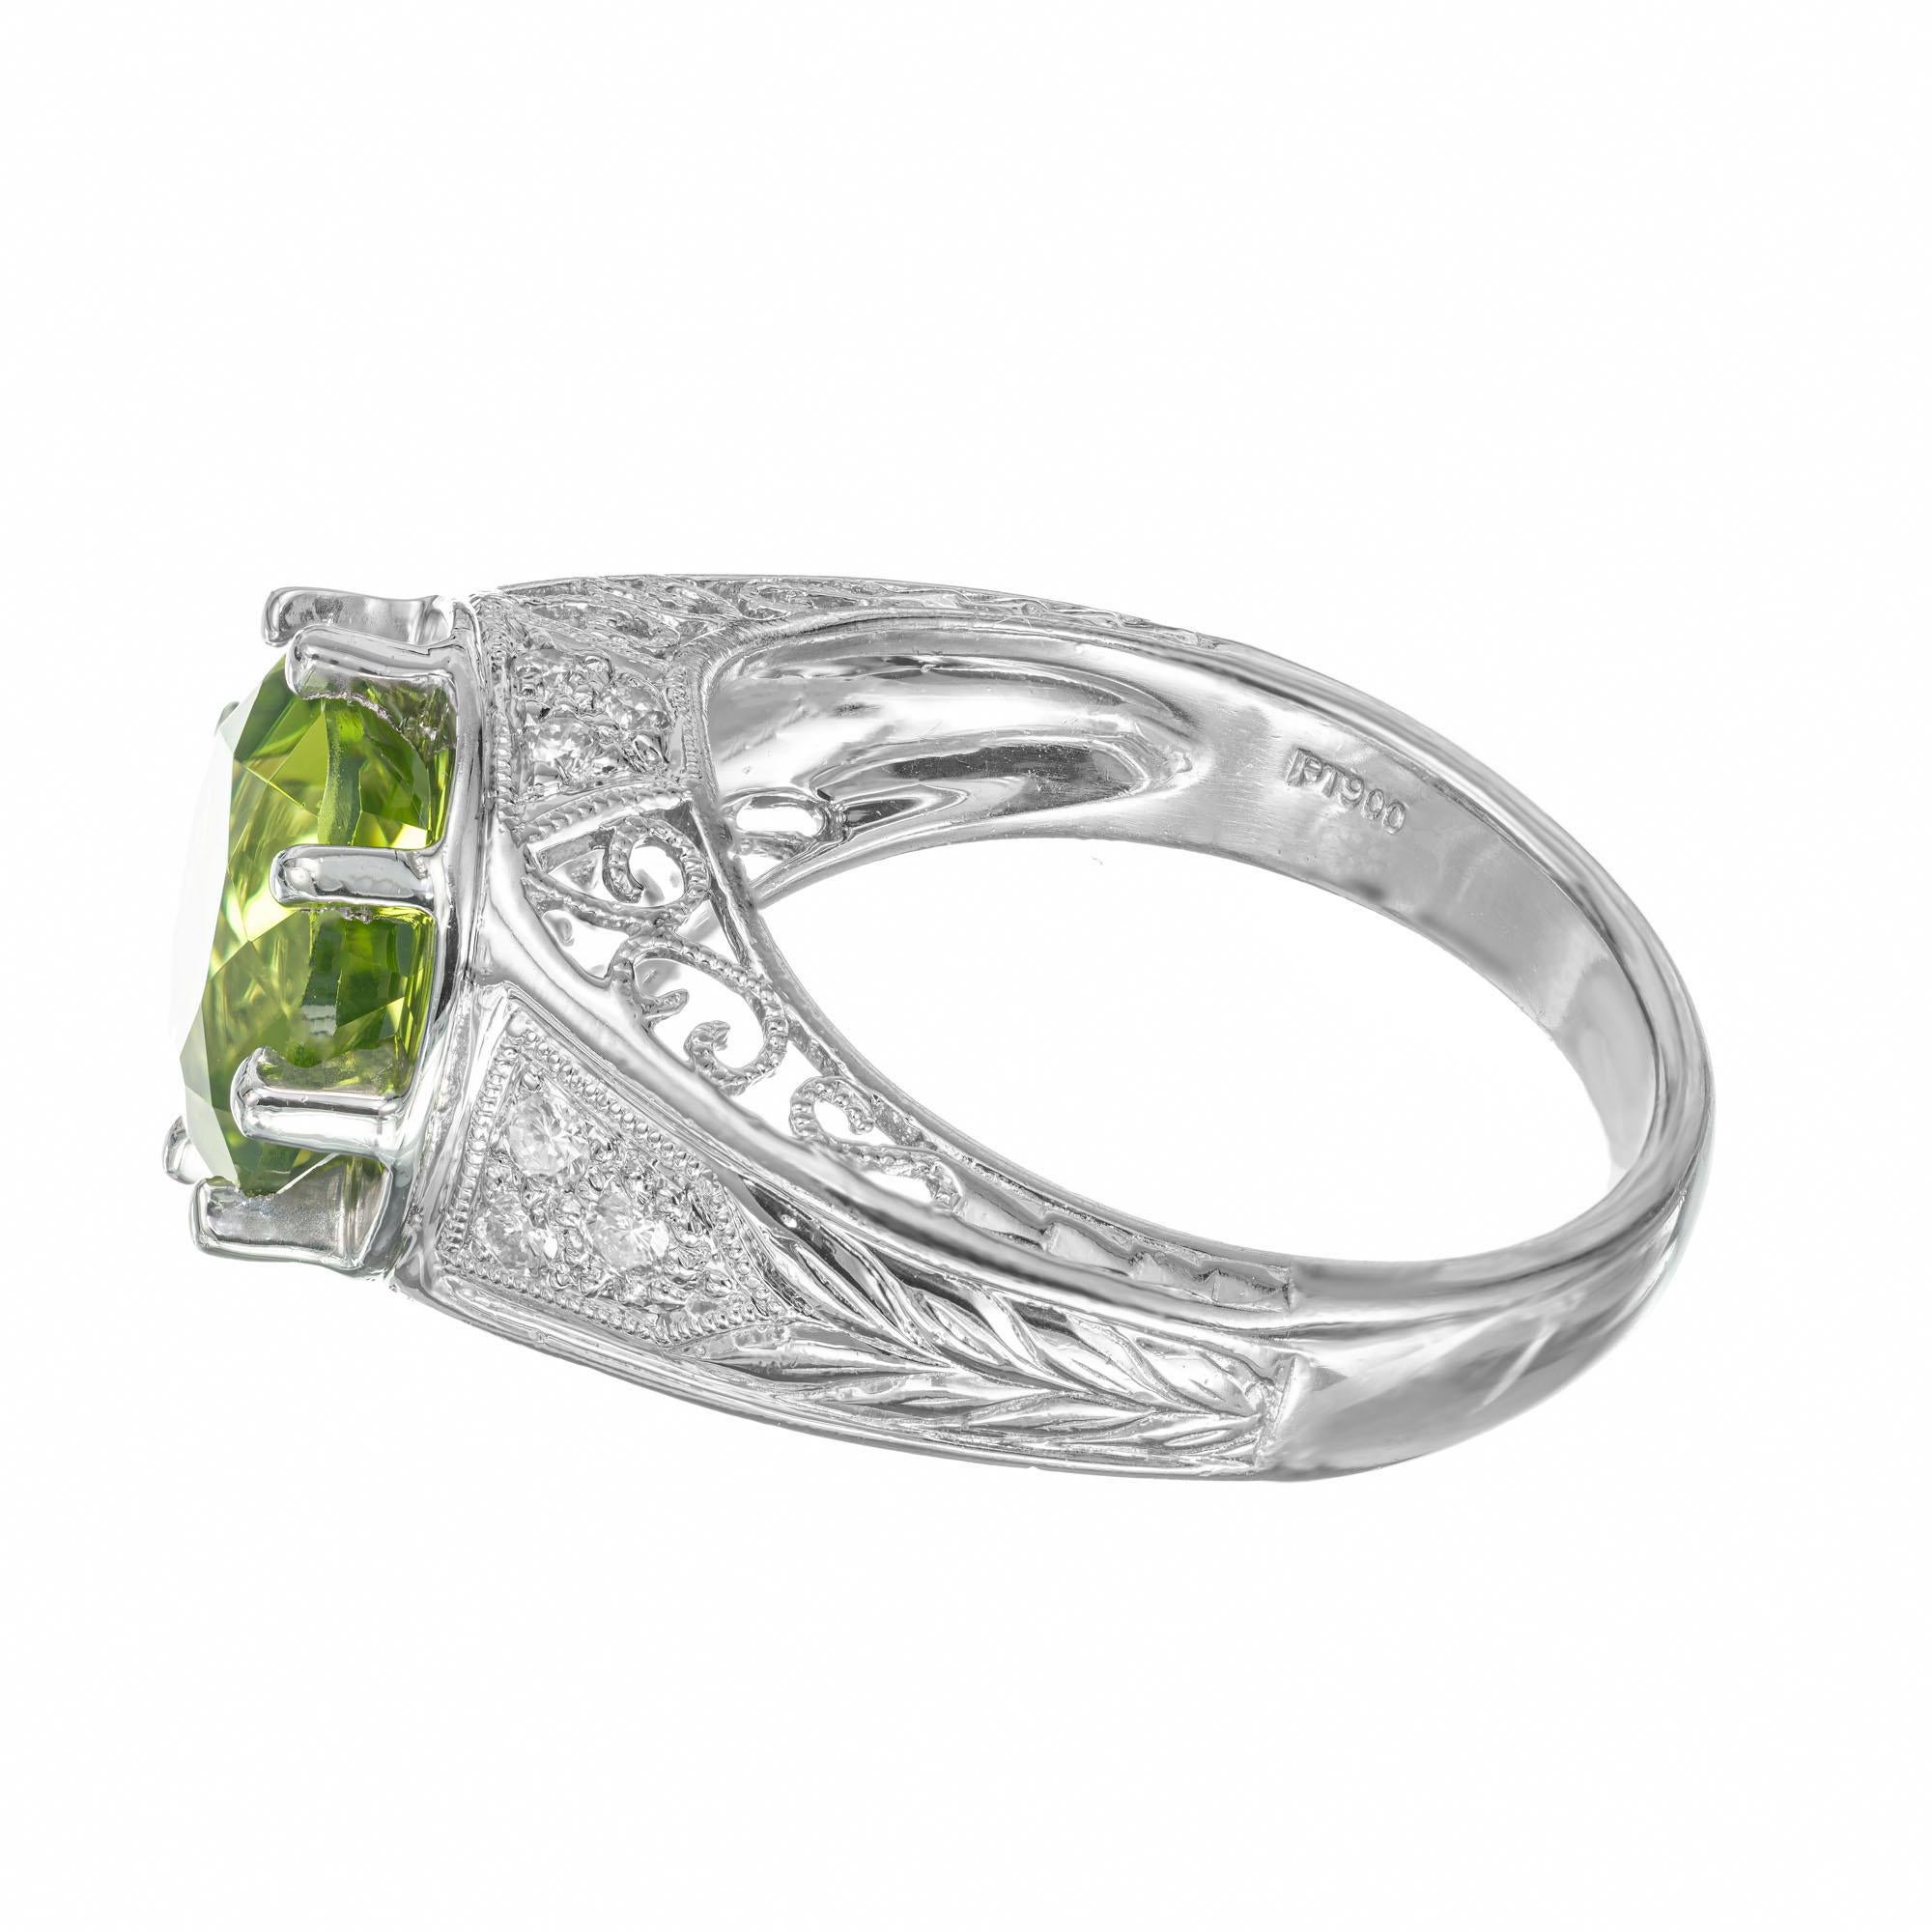 diamond engagement ring with peridot accents